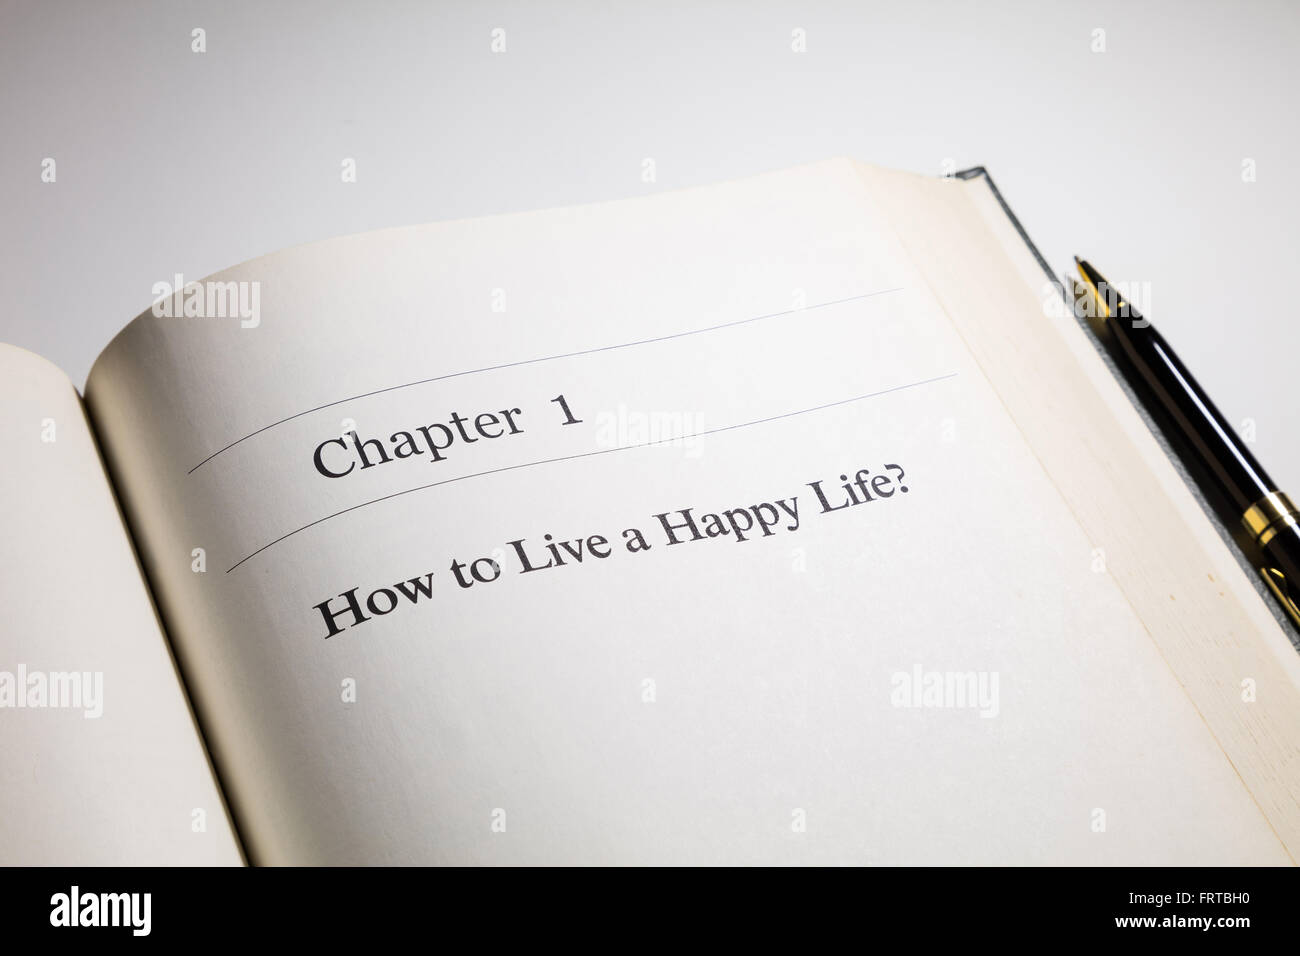 how to live a happy life?  life  philosophy, fake book. Stock Photo